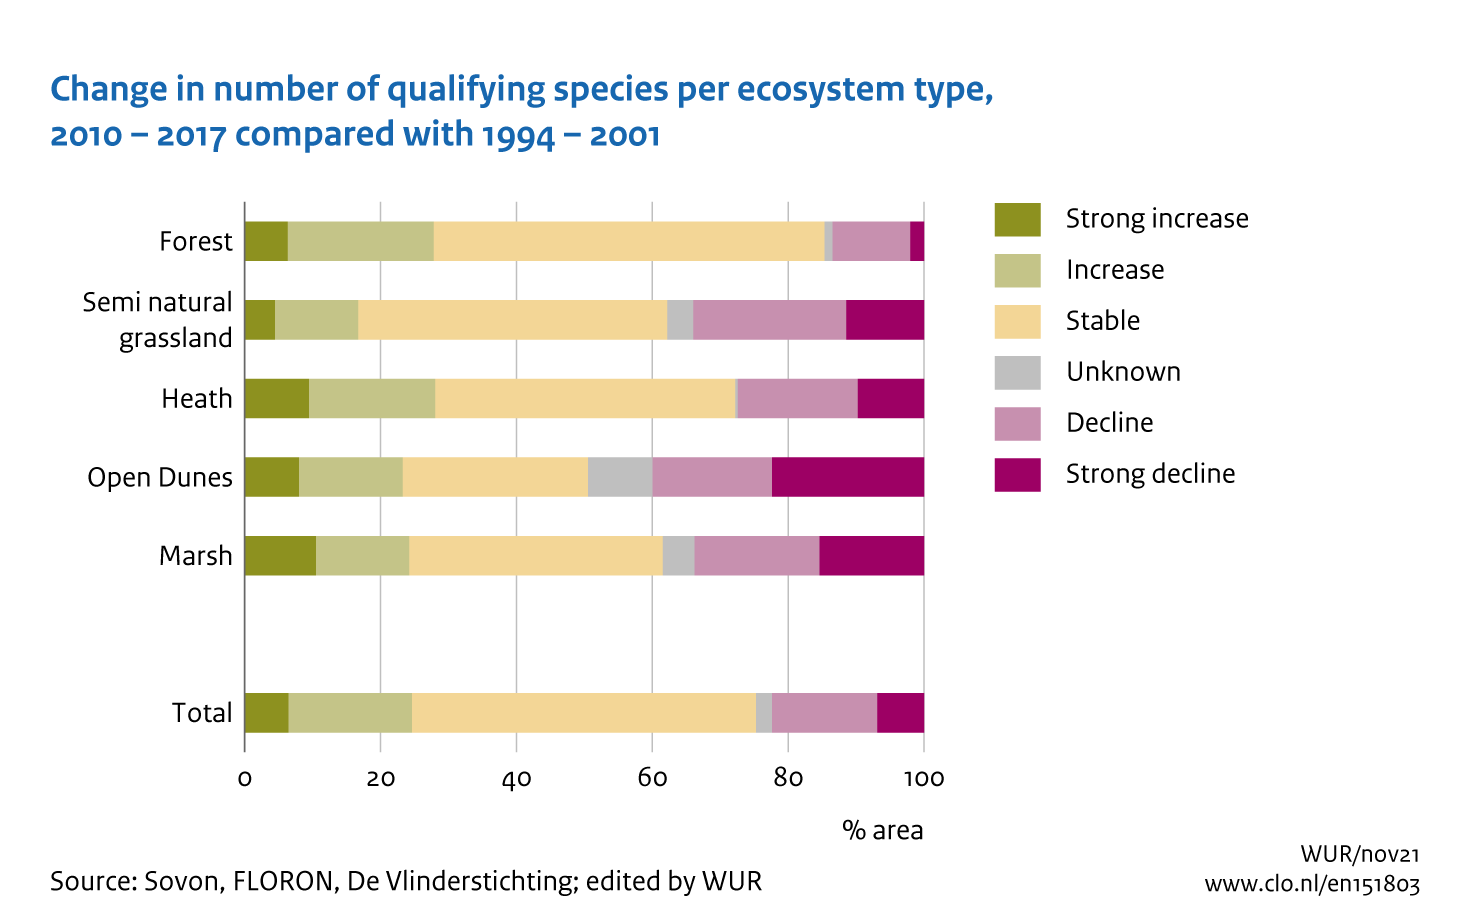 Image  Change in number of qualifying species per ecosystem type, 2010-2017 compared with 1994-2001. The image is further explained in the text.